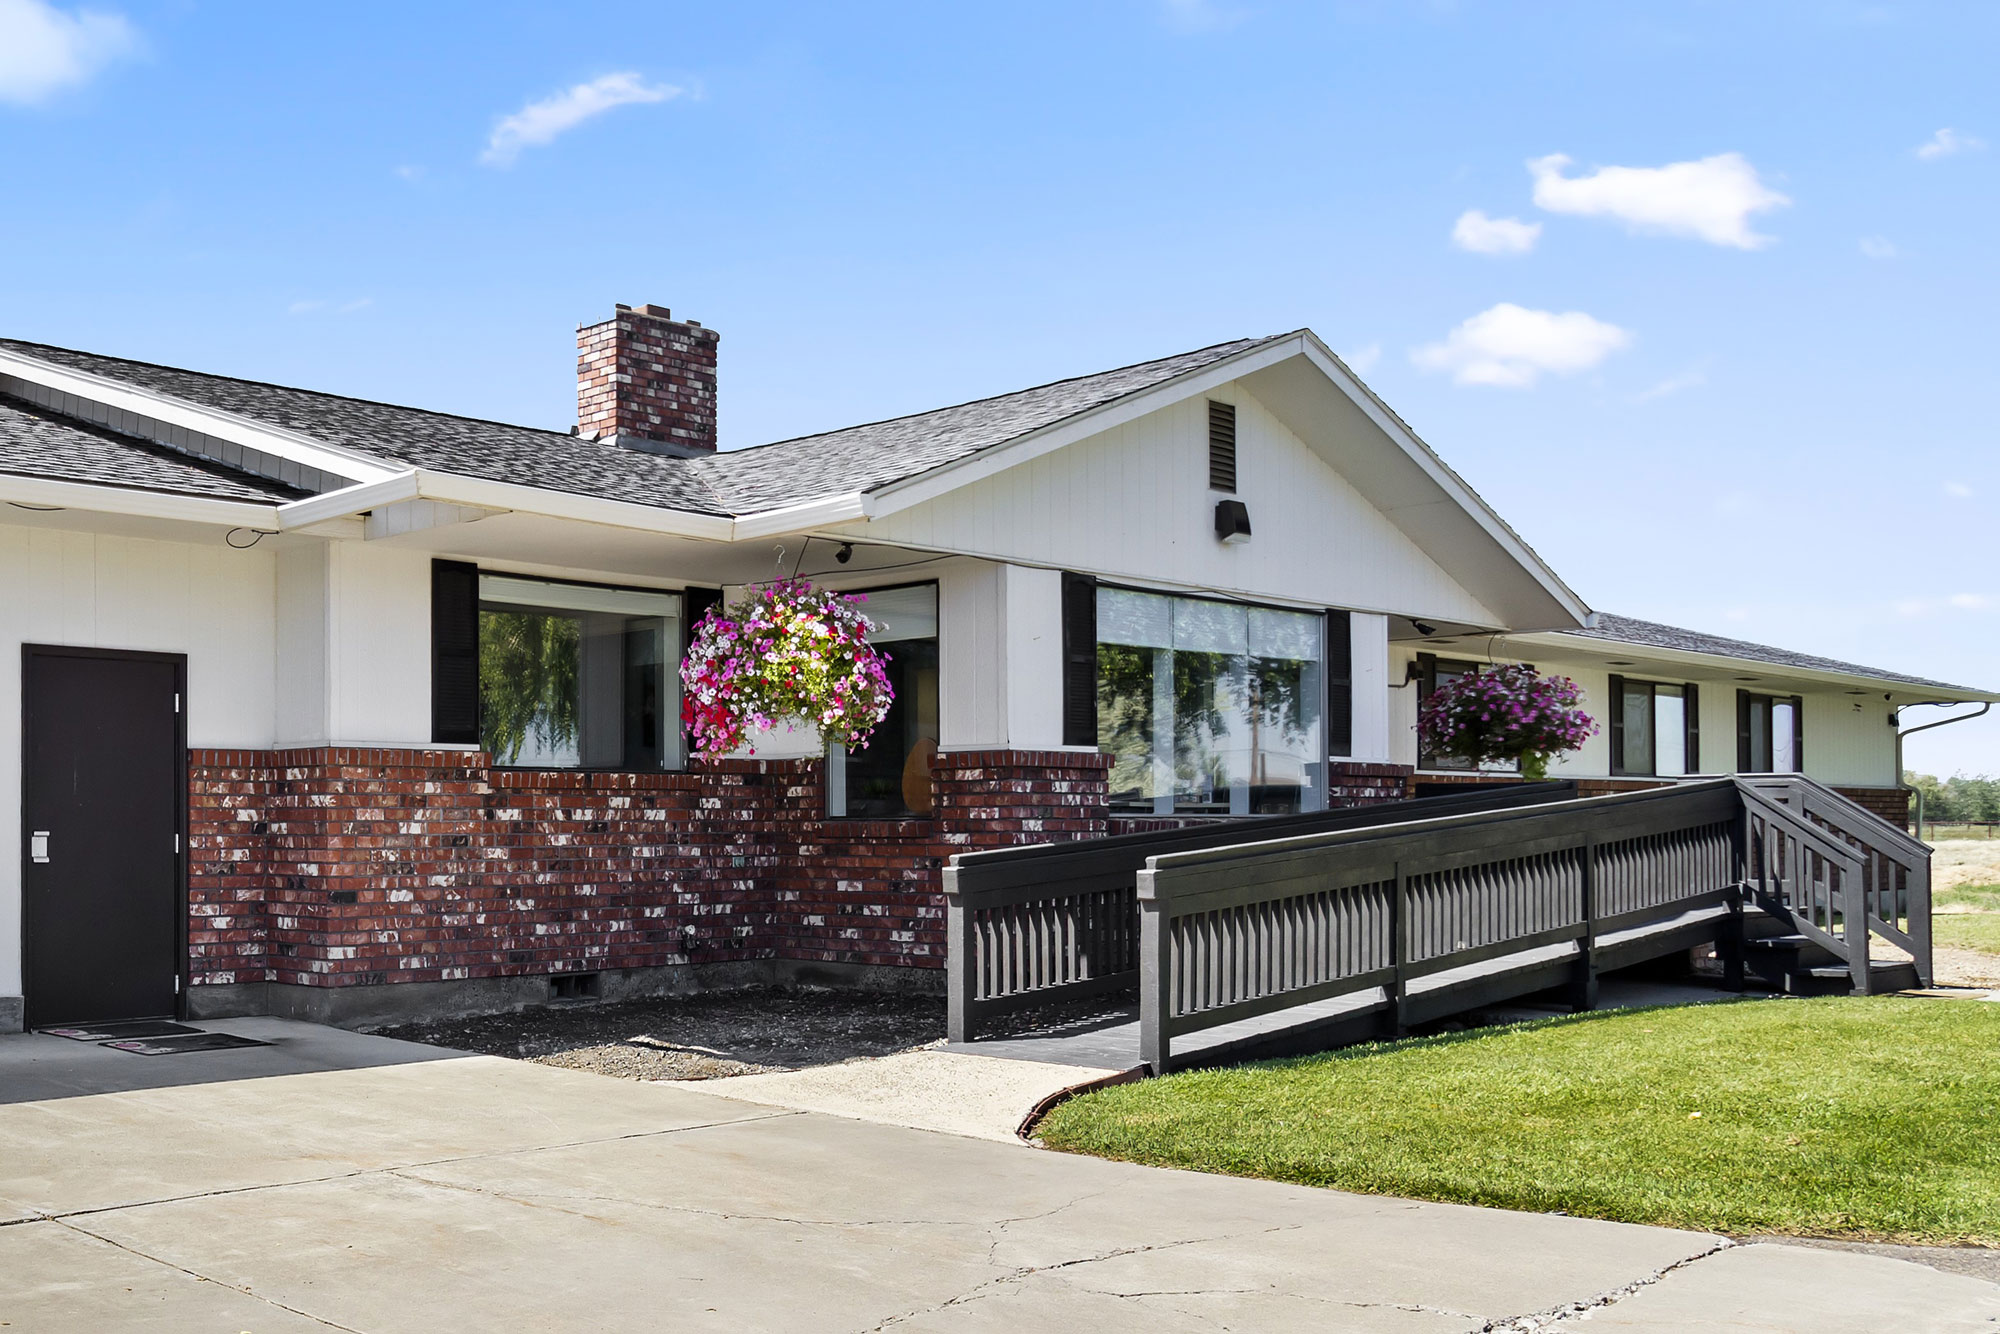 The Heartlinks Adult Family Home is located at 3920 Outlook Road in Sunnyside. The large parking lot and driveway make visiting family easy to do. The entire home is wheelchair accessible.